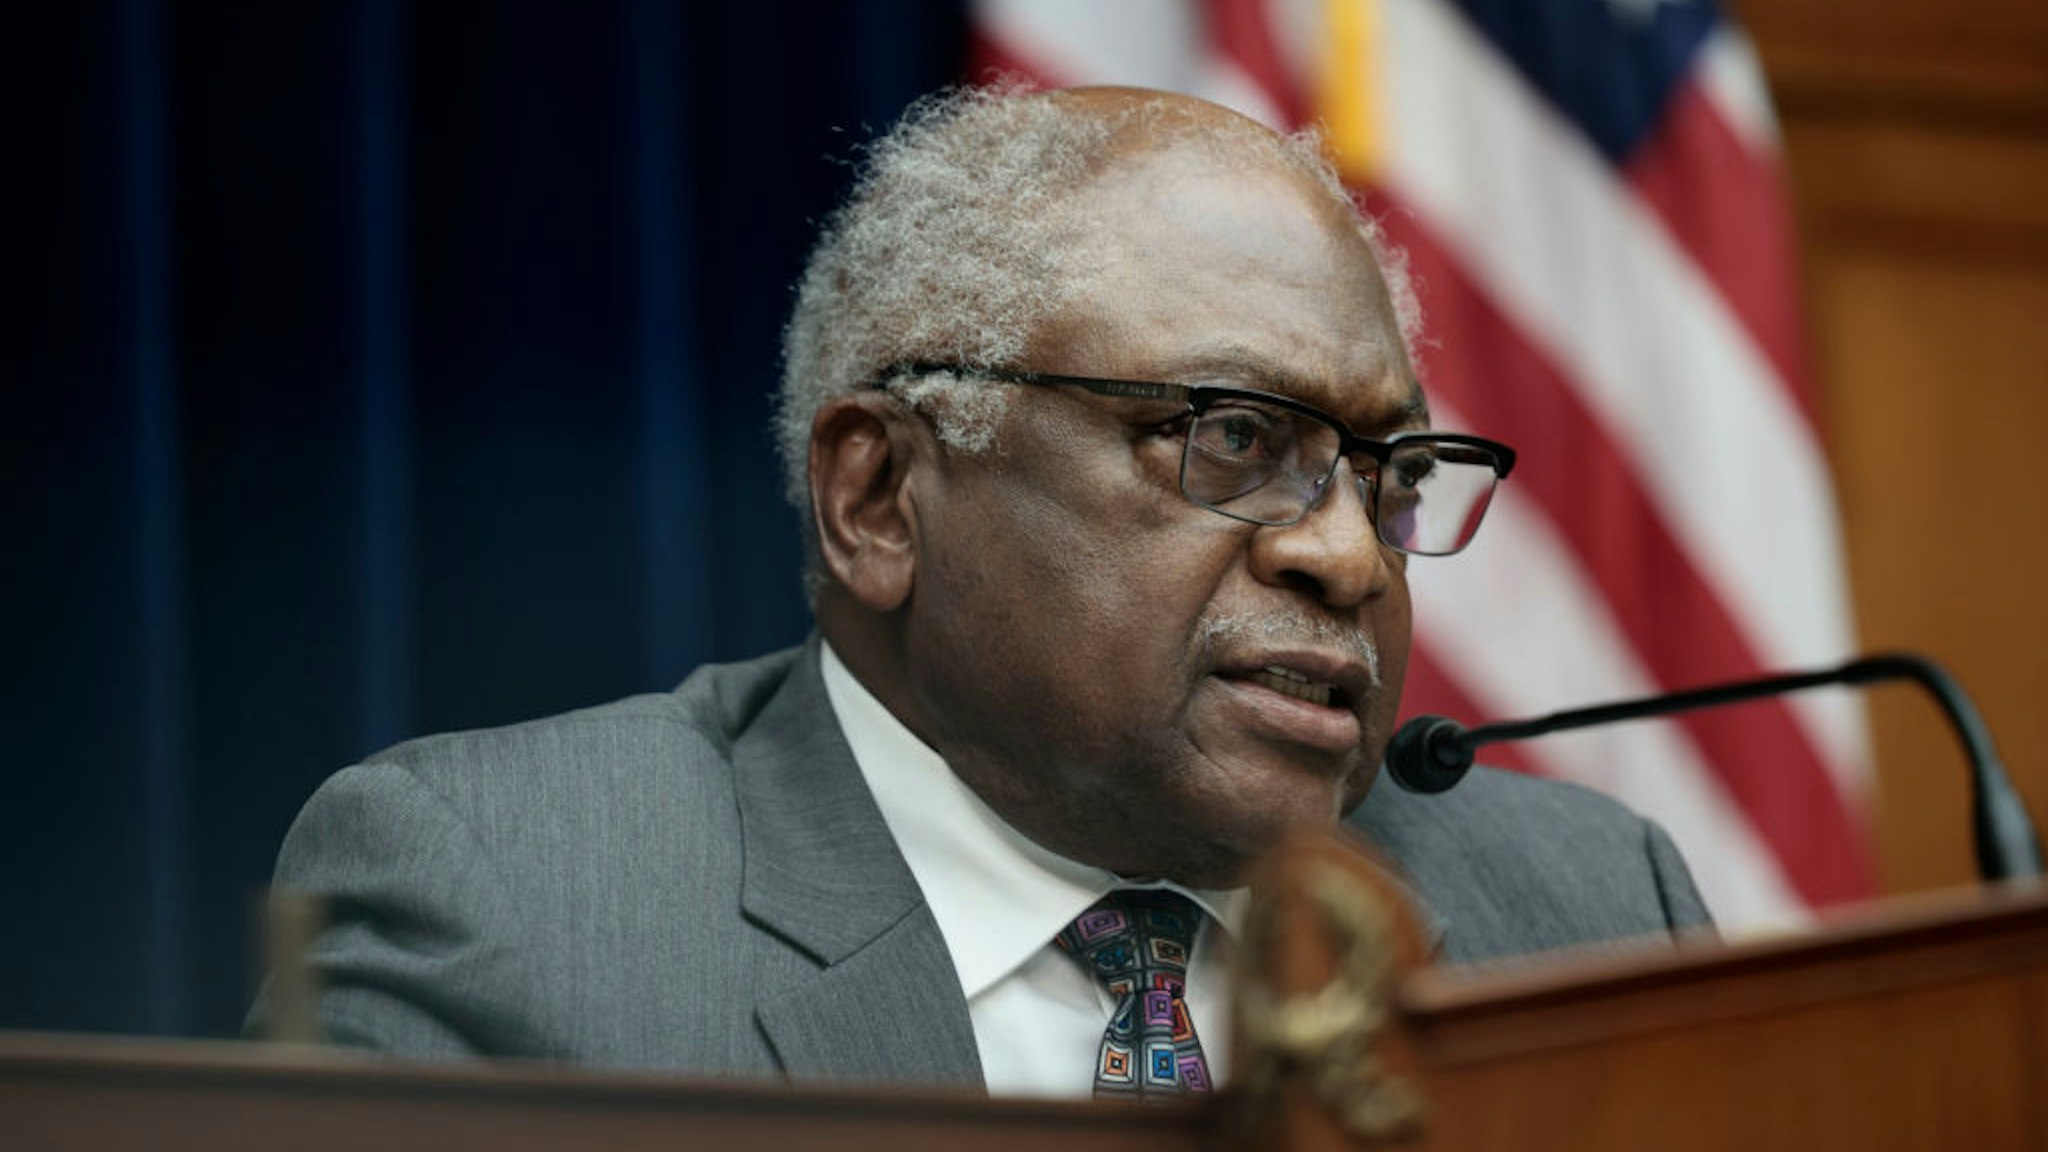 House Coronavirus Subcommittee Chairman James E. Clyburn, (D-SC) speaks during a hearing in the Rayburn House Office Building on November 17, 2021 in Washington, DC.